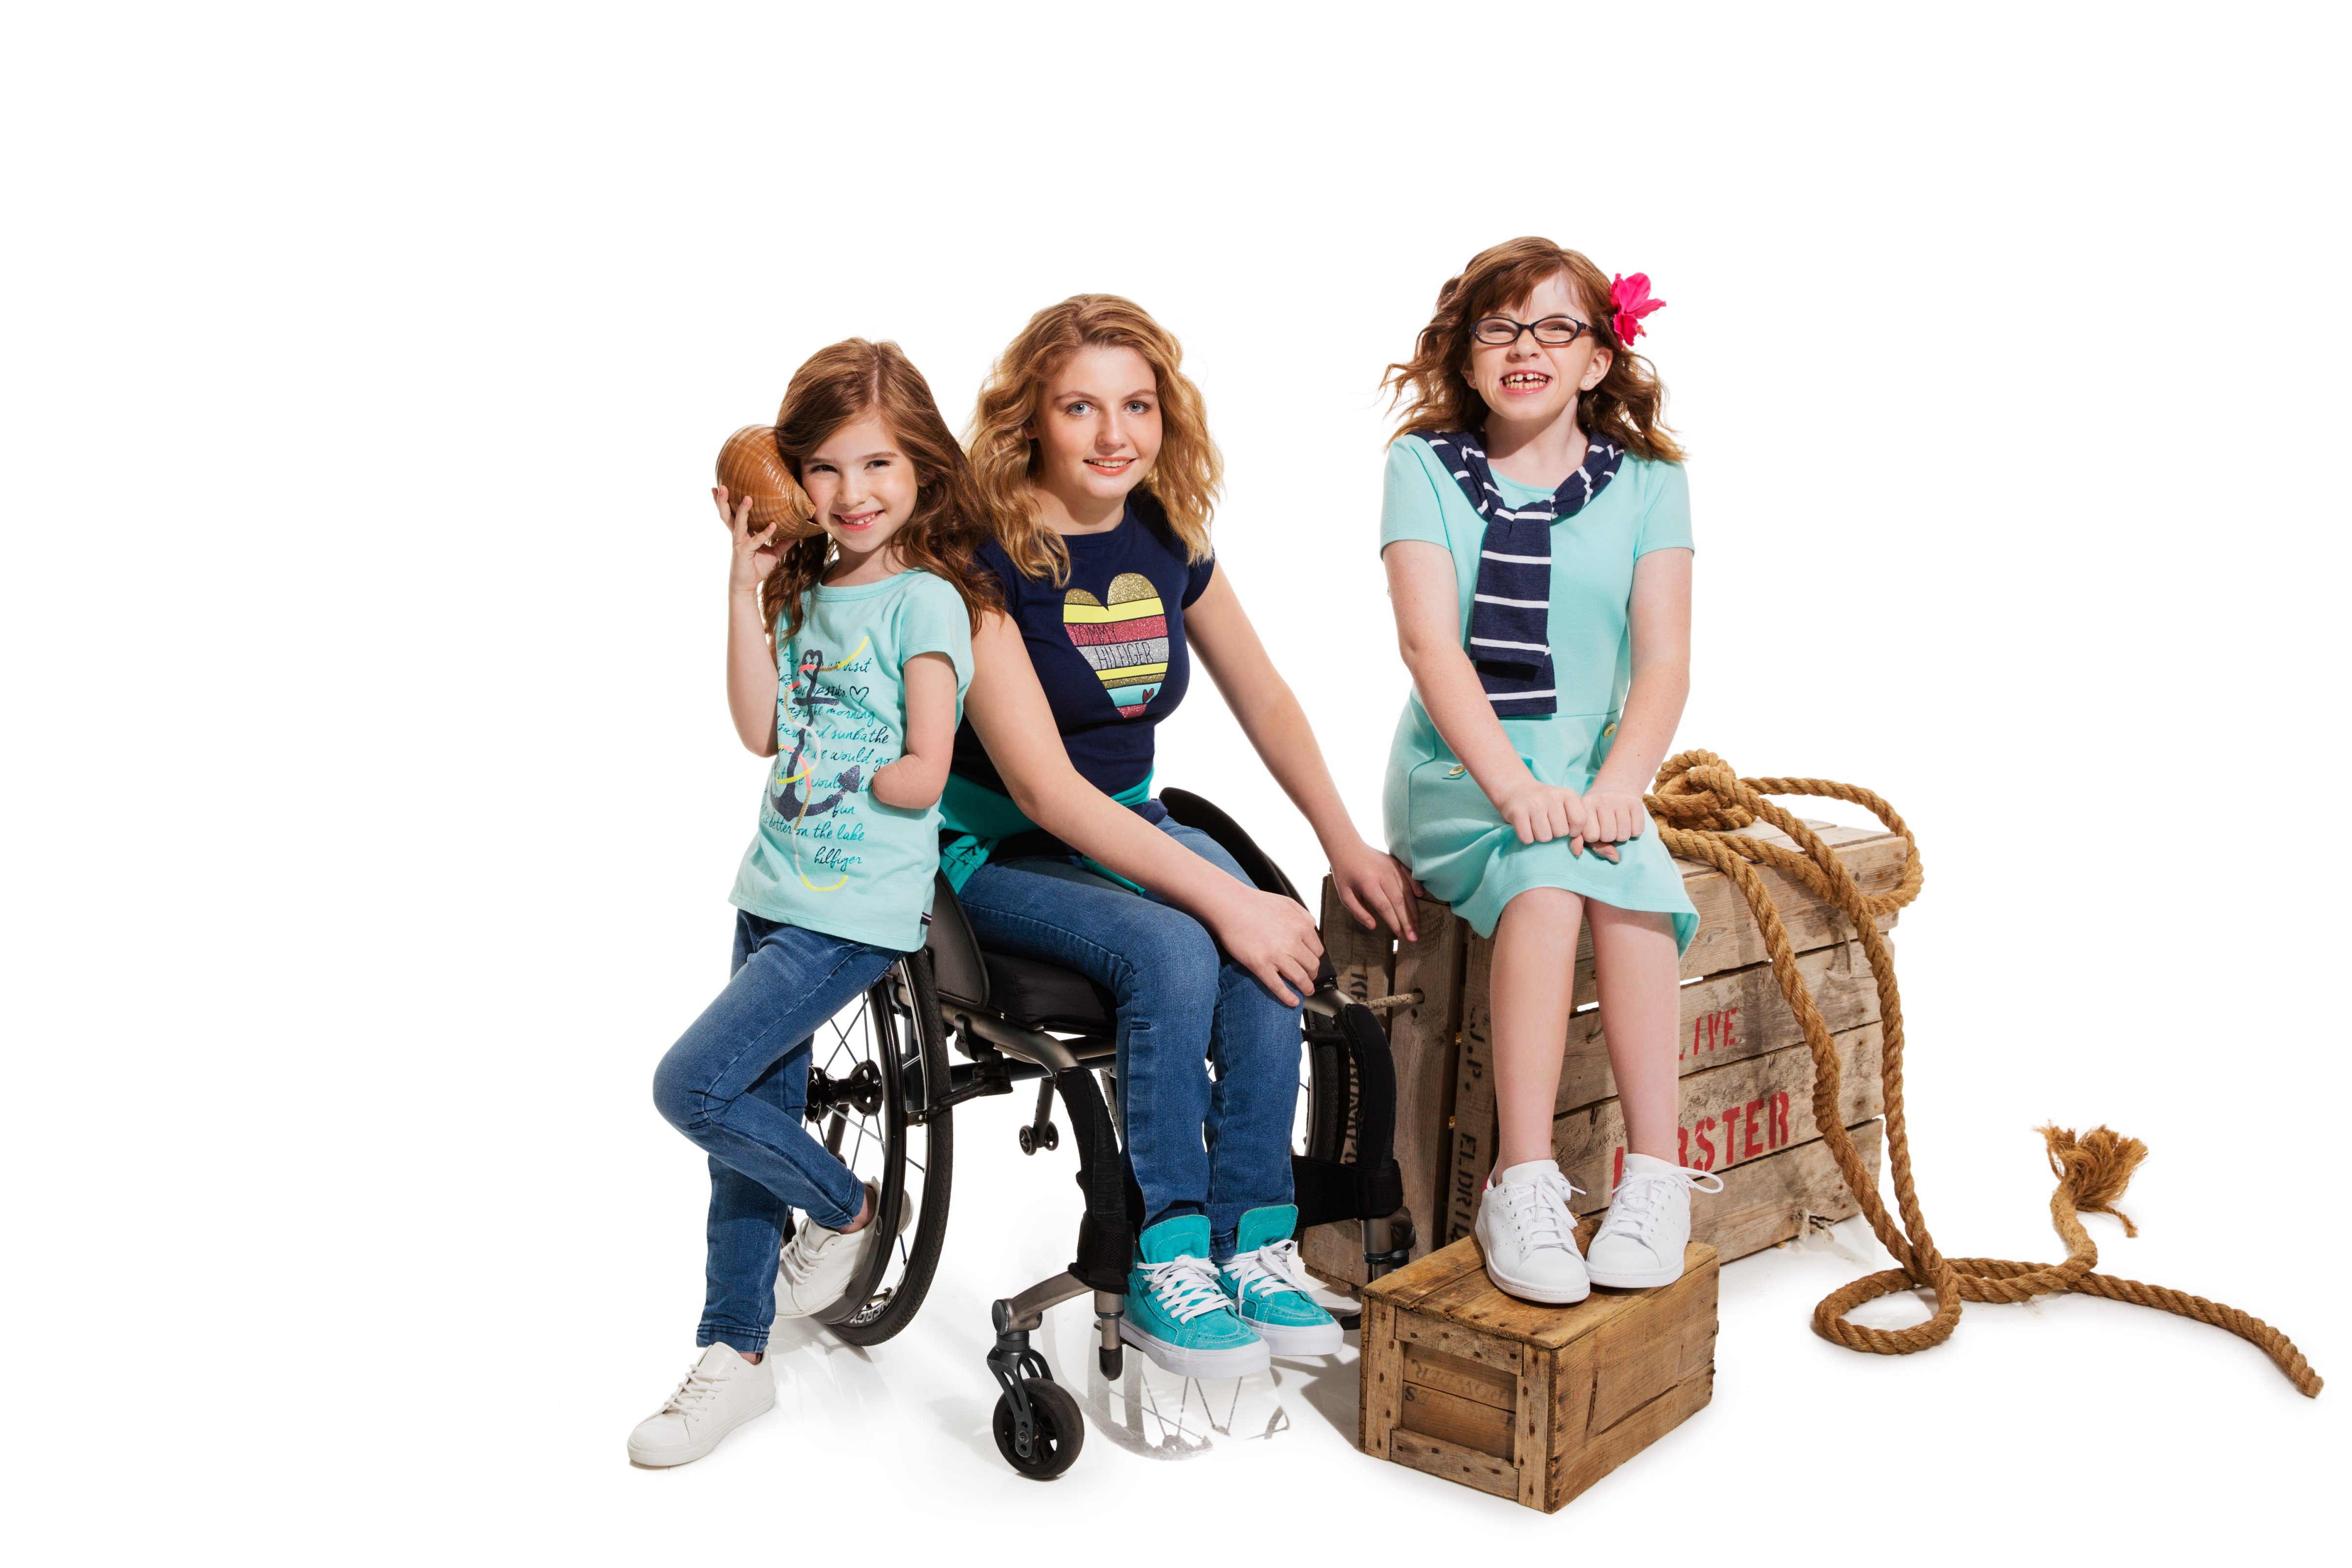 Tommy Hilfiger adaptive collection (Photo by Richard Corman for Tommy Hilfiger)